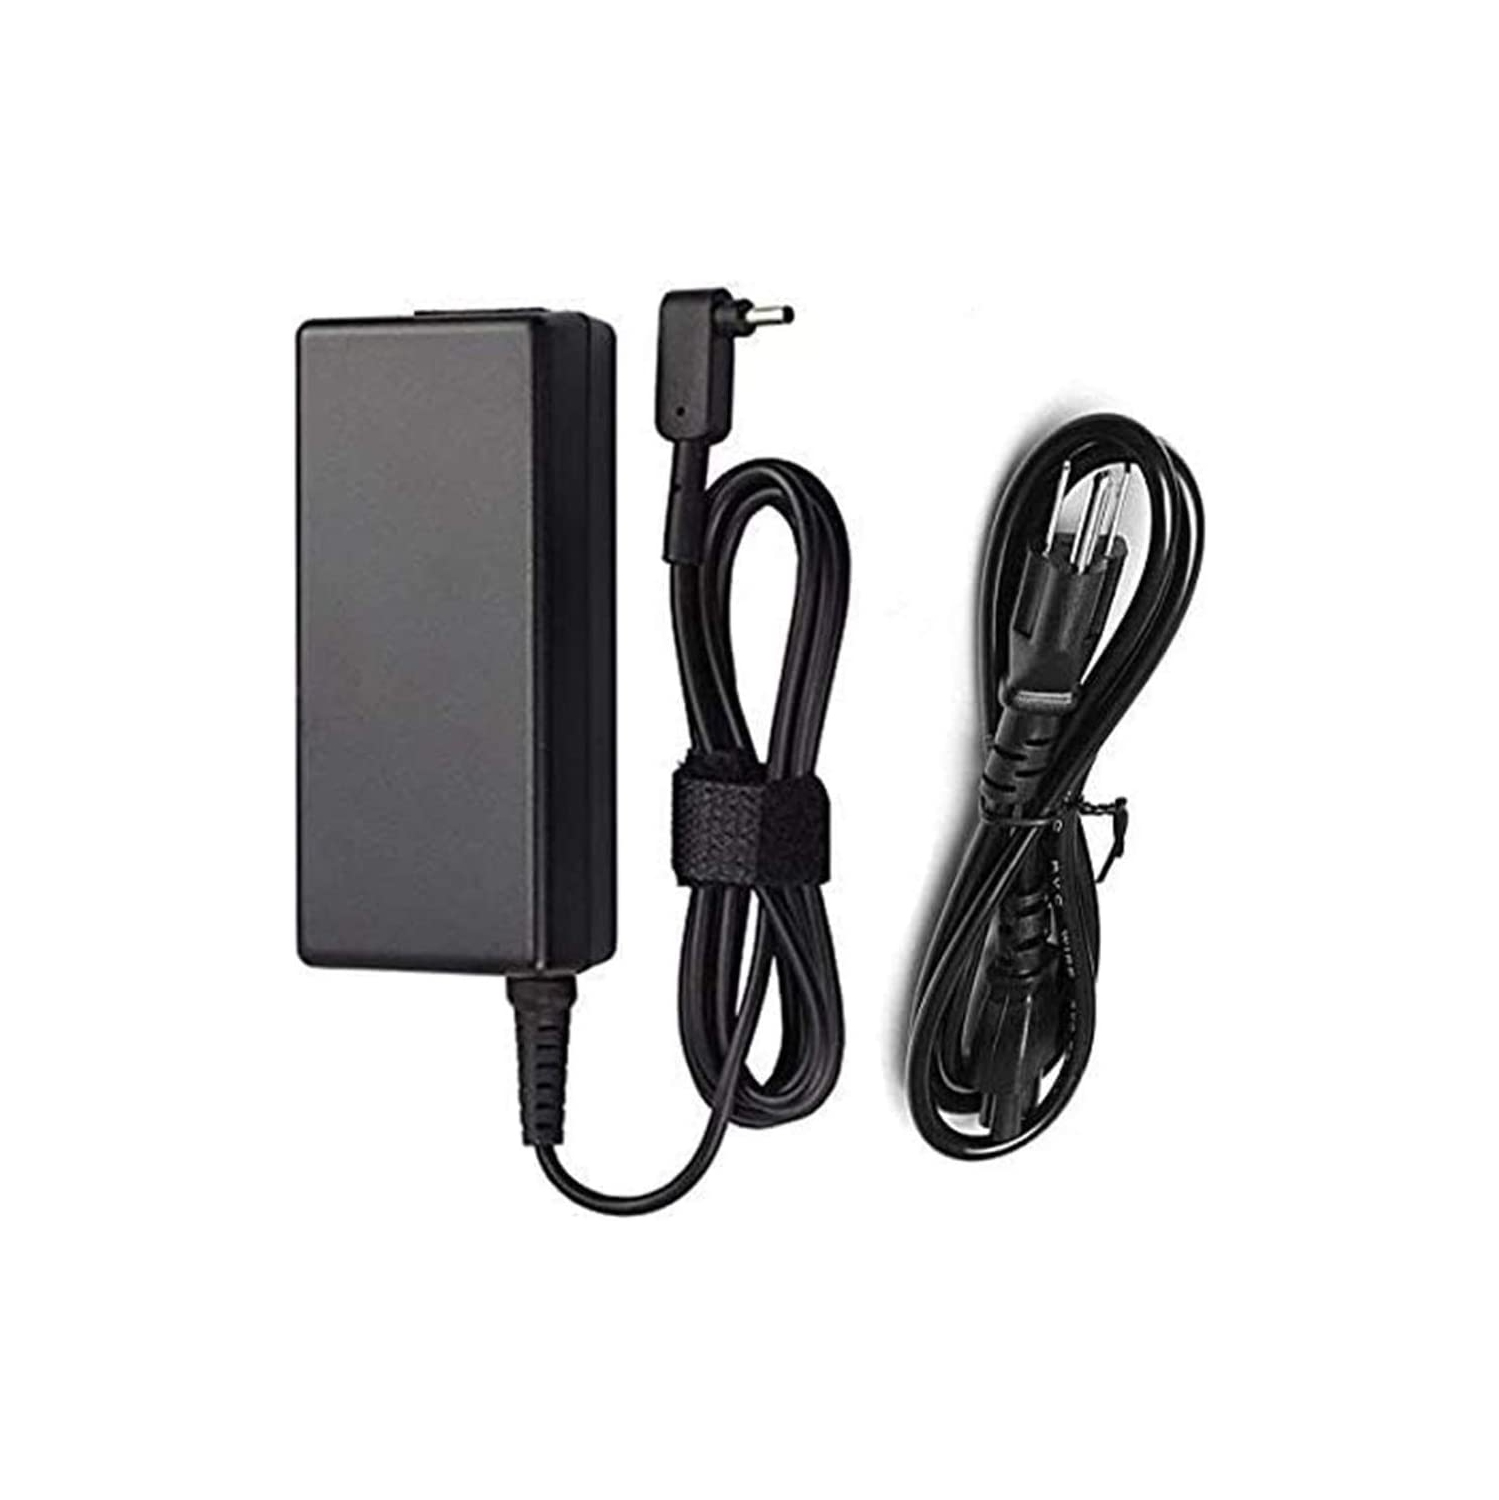 45W AC-Adapter-Charger for Acer Chromebook CB3 CB5 11 13 14 15 R11 A13-045N2A C731 C738T N15Q8 CB3-532 CB3-431 CB3-131 PA-1450-26 Laptop Power-Supply-Cord